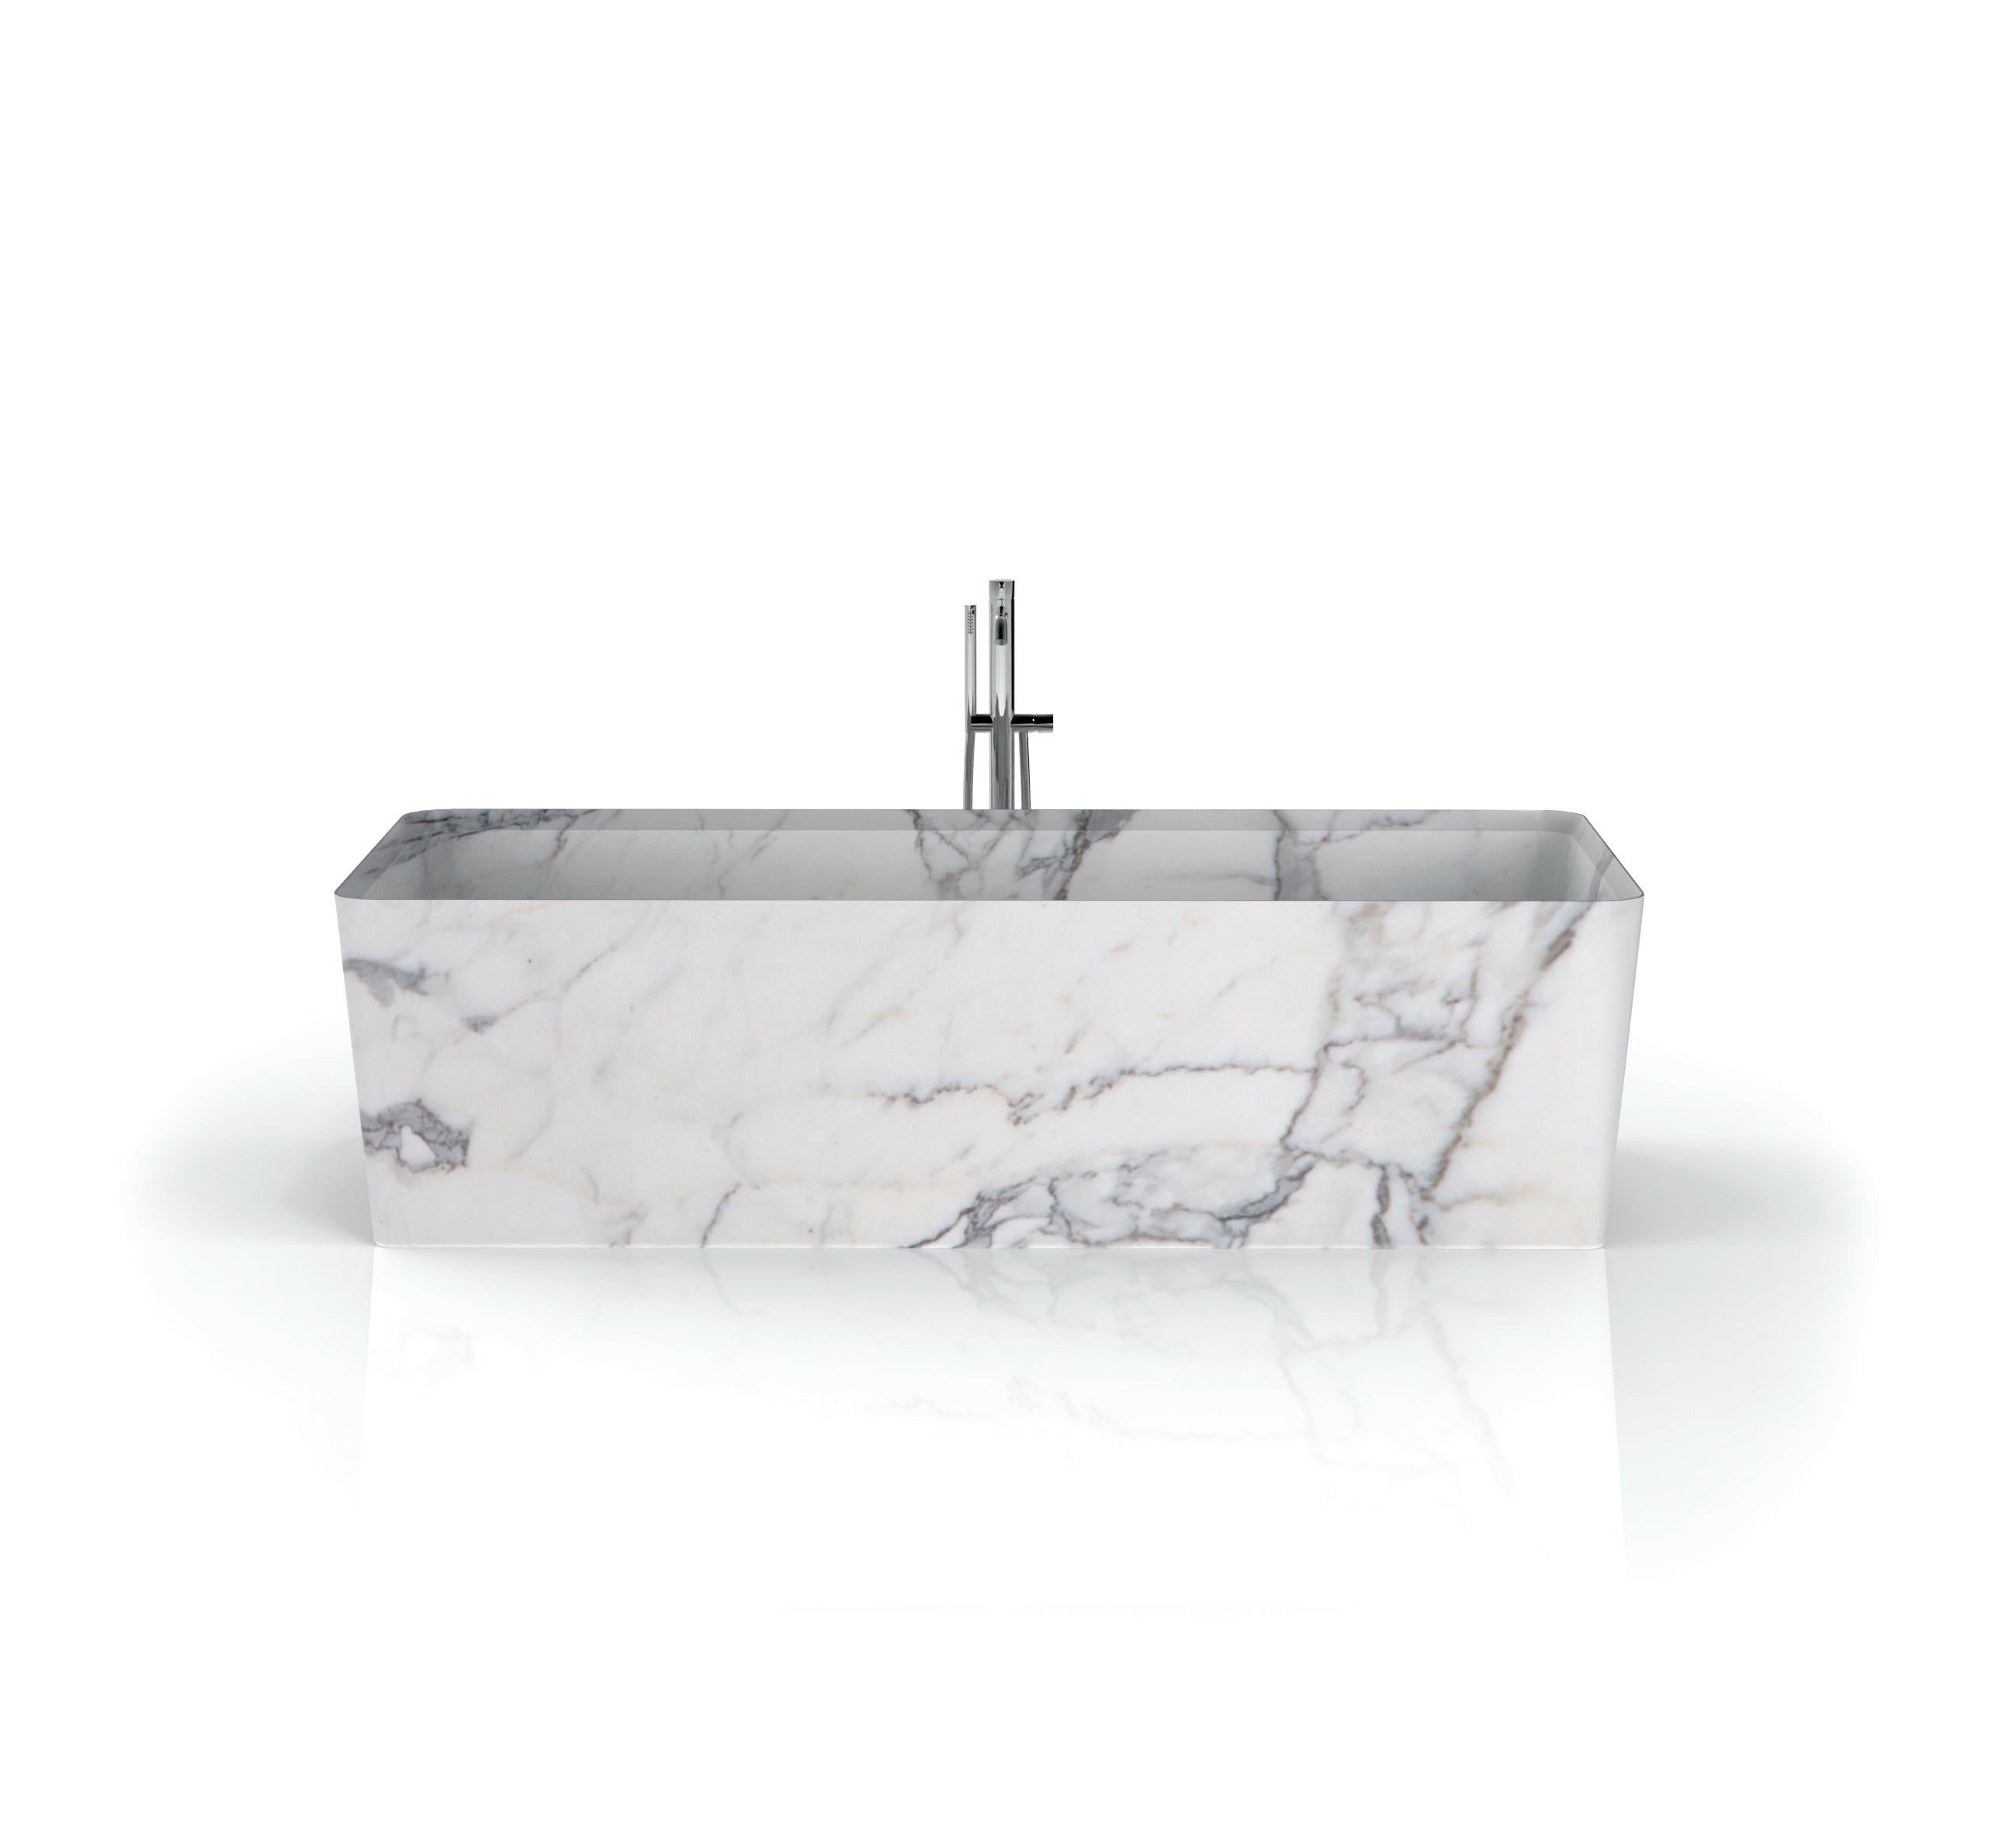 Entity cono bath by Marmi Serafini.
Materials: Statuarietto marble.
Dimensions: D 80 x W 180 x H 50 cm.
Available in other marbles.
Tap not included.

Simple and slender lines, rounded and soft boards, subtle e and elegant edges: a solid